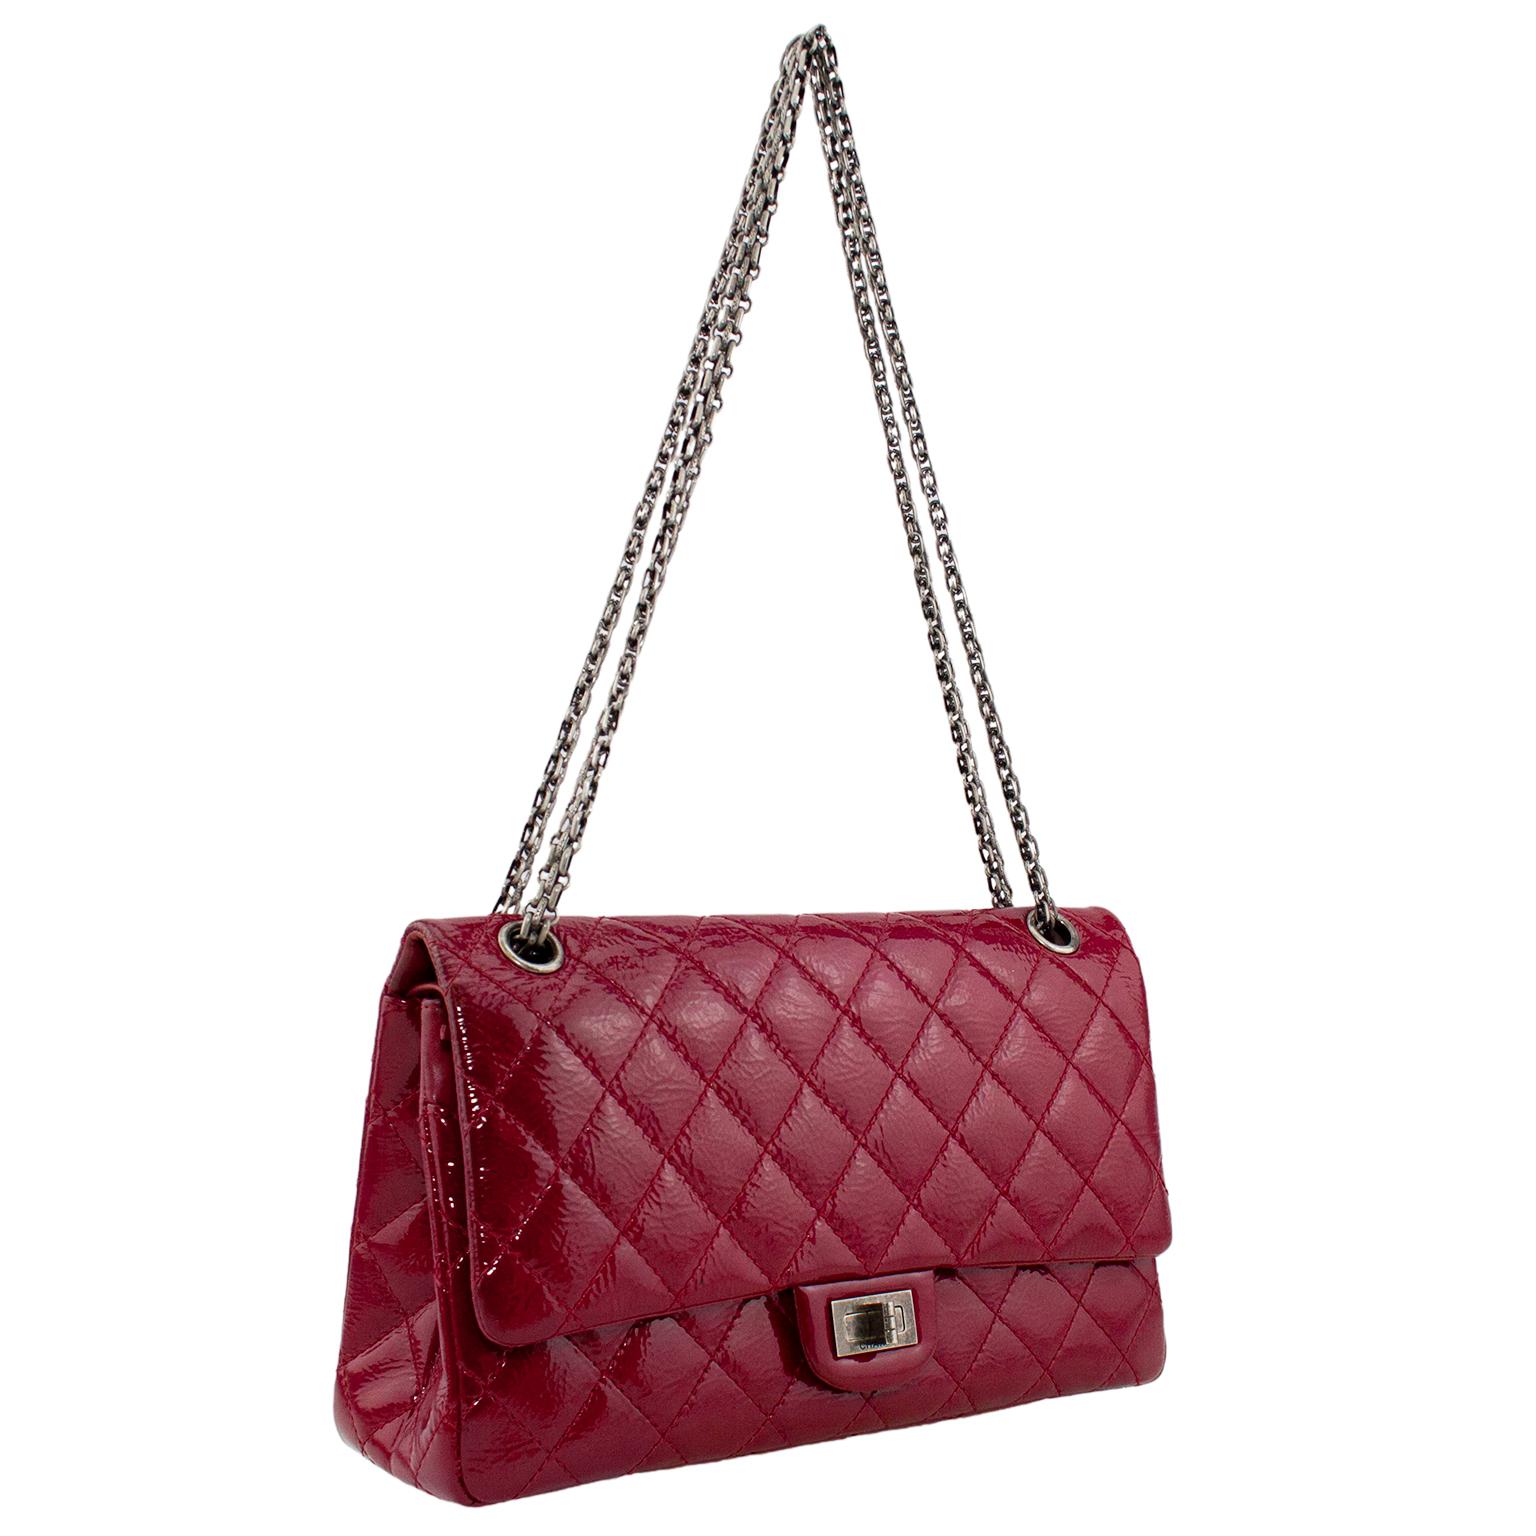 Gorgeous Chanel 2.55 reissue classic flap bag. Quilted raspberry red patent leather with ruthenium Chanel reissue chain shoulder strap and mademoiselle turnlock closure. Chain strap is versatile and can be worn doubled as top handles or long on the